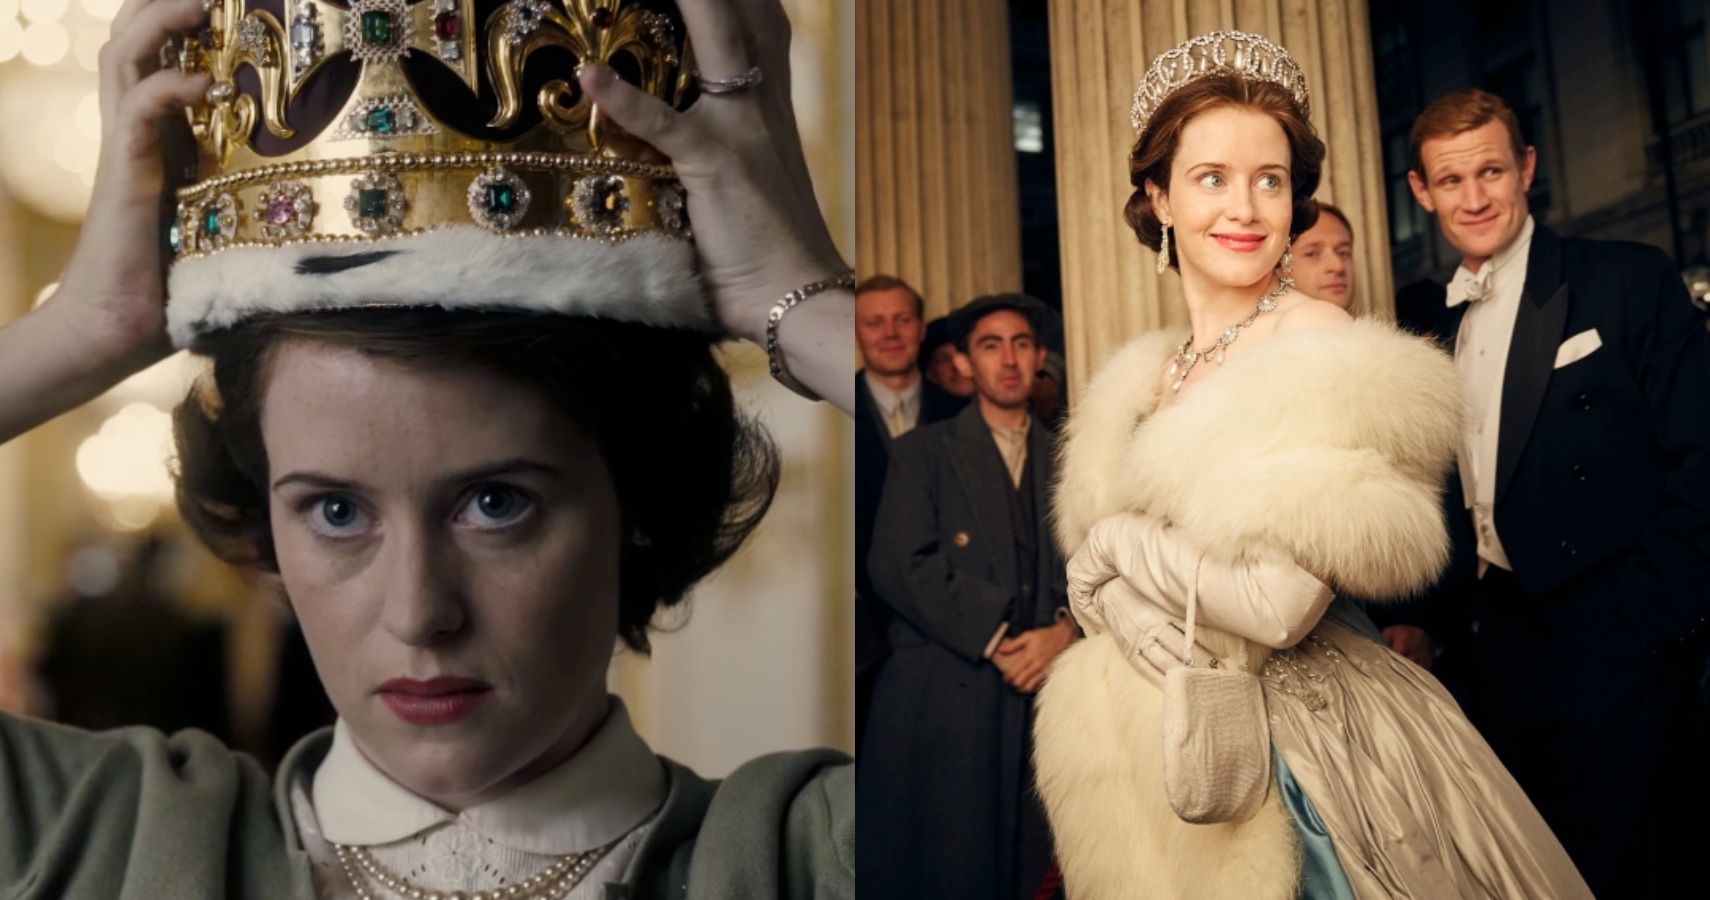 The Crown The 10 Worst Ranked Episodes According To Imdb